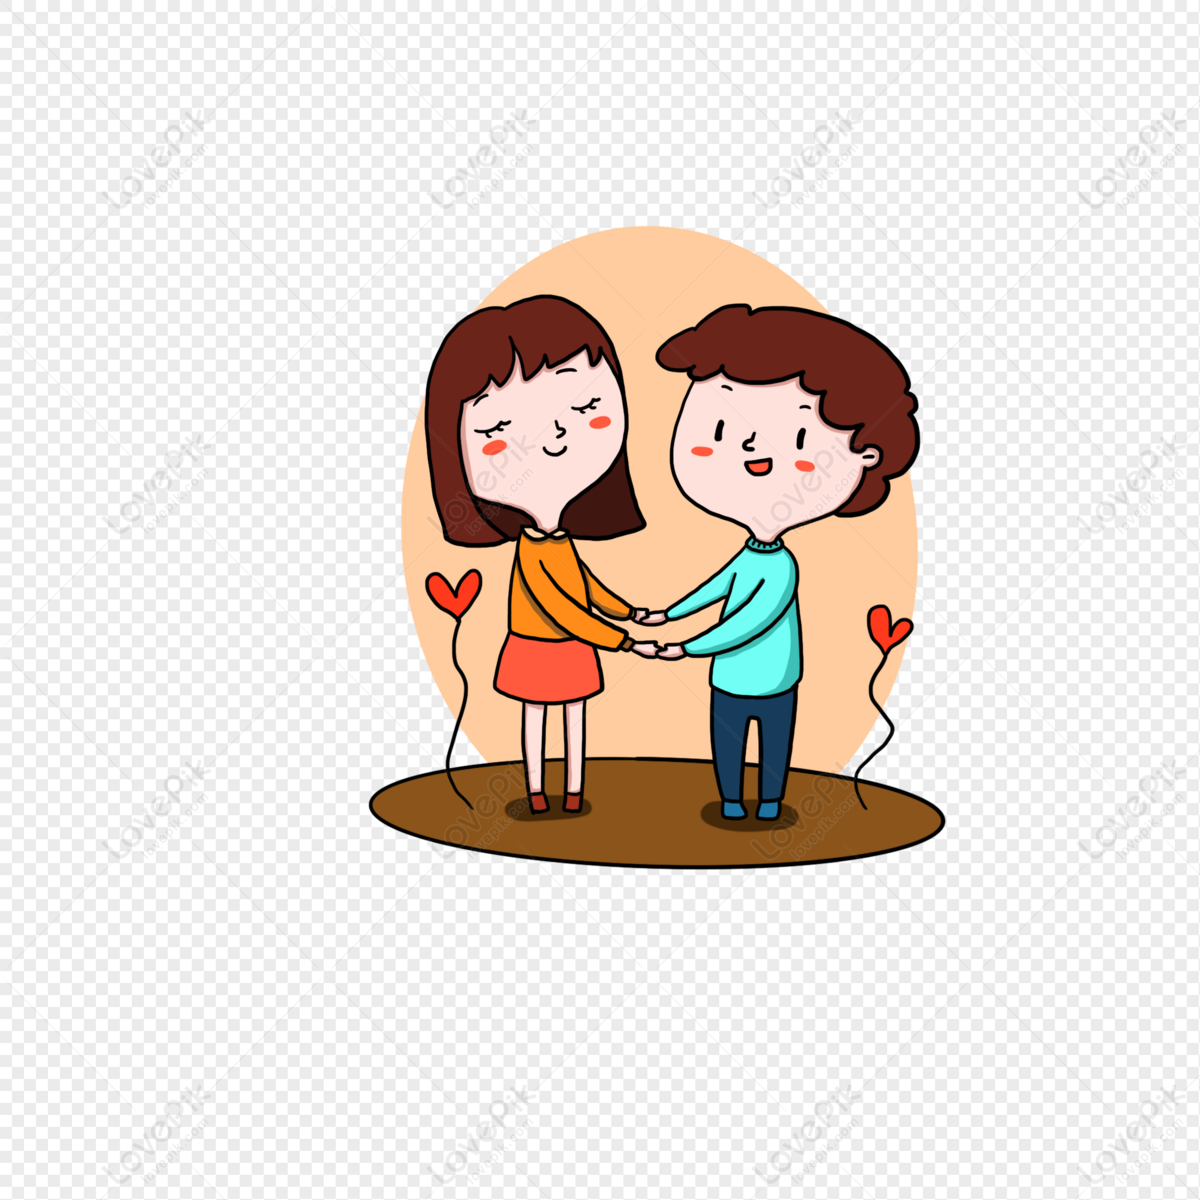 Cartoon Hand Drawn Happy Couple Romantic Holding Hands PNG Free ...